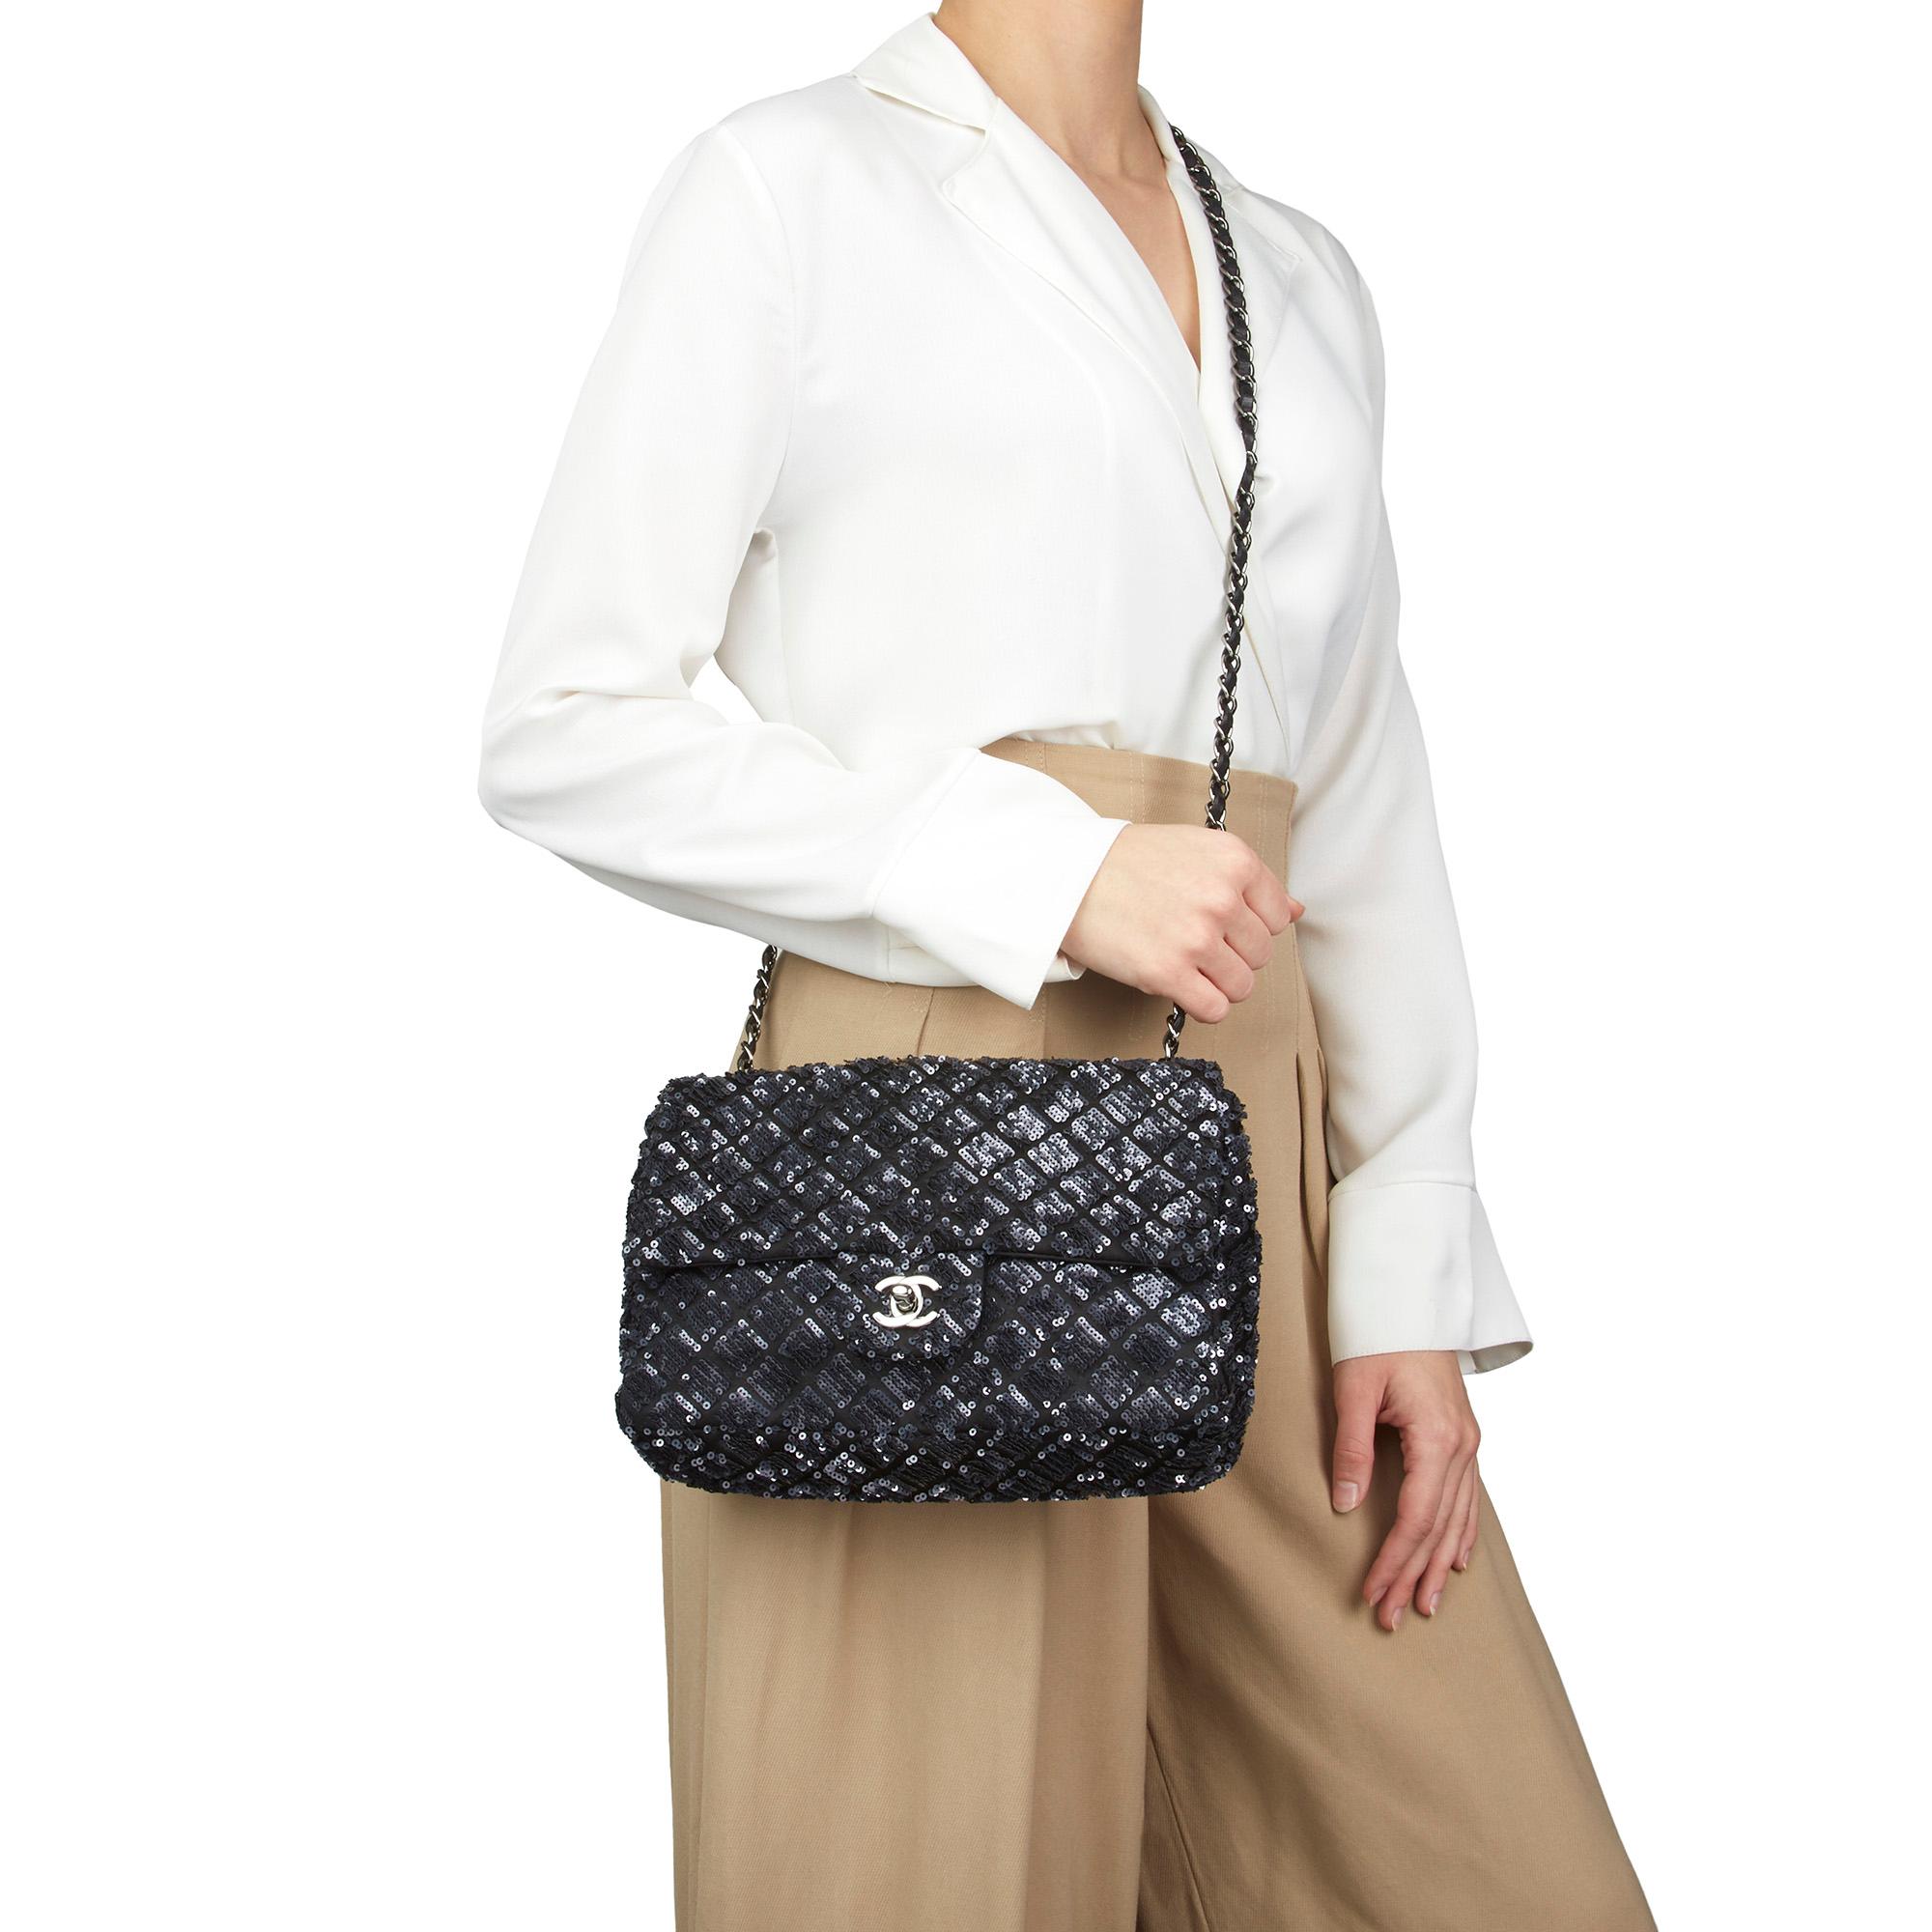 2013 Chanel Navy Sequin Embellished Classic Single Flap Bag 8